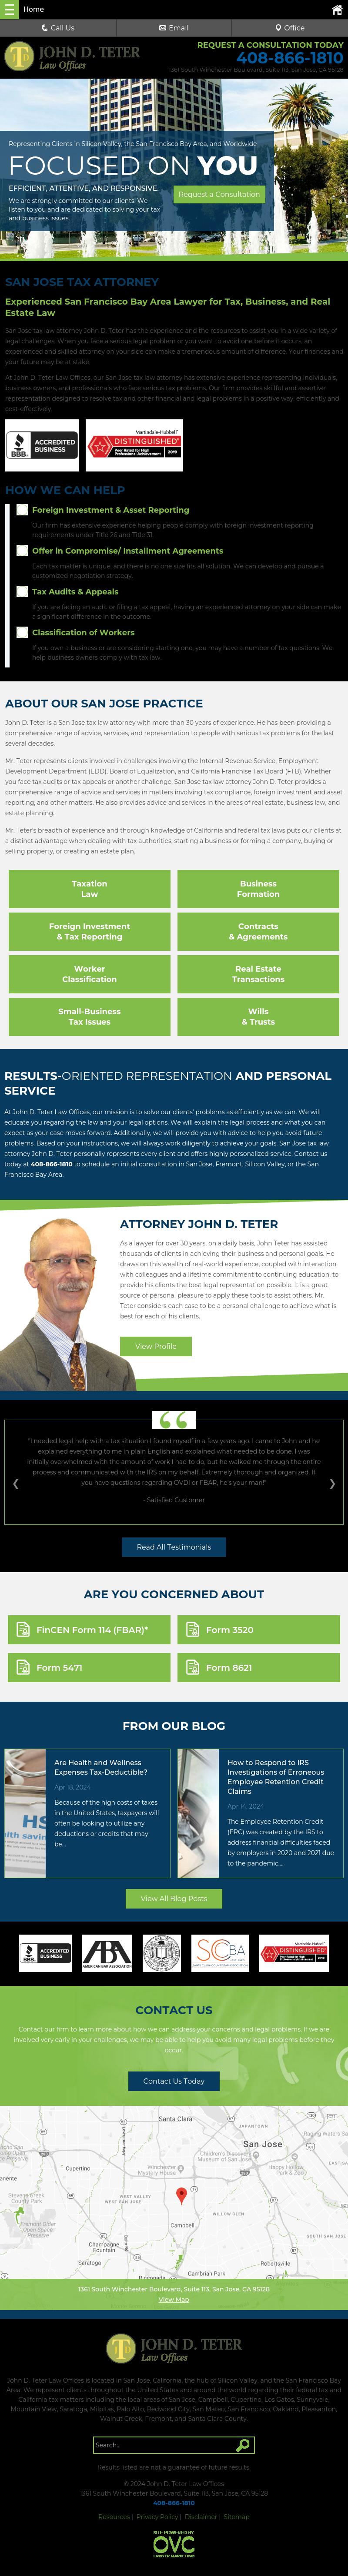 Law Offices Of John D Teter - San Jose CA Lawyers